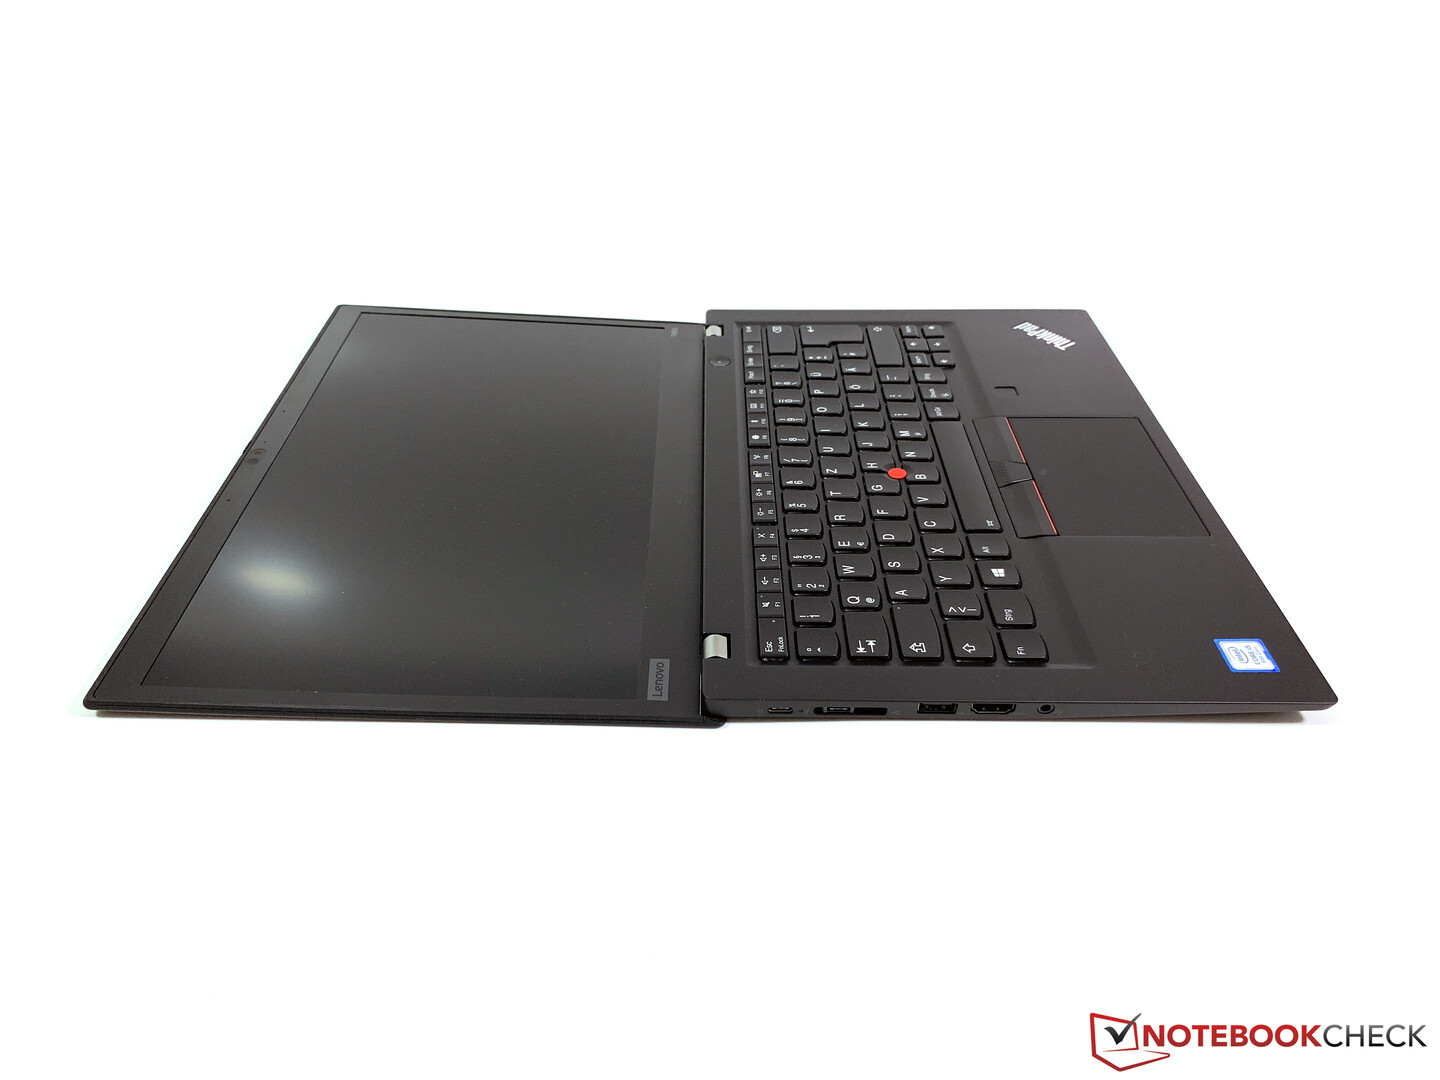 Lenovo ThinkPad T490s (i5, Low Power FHD) Laptop Review - NotebookCheck.net Reviews